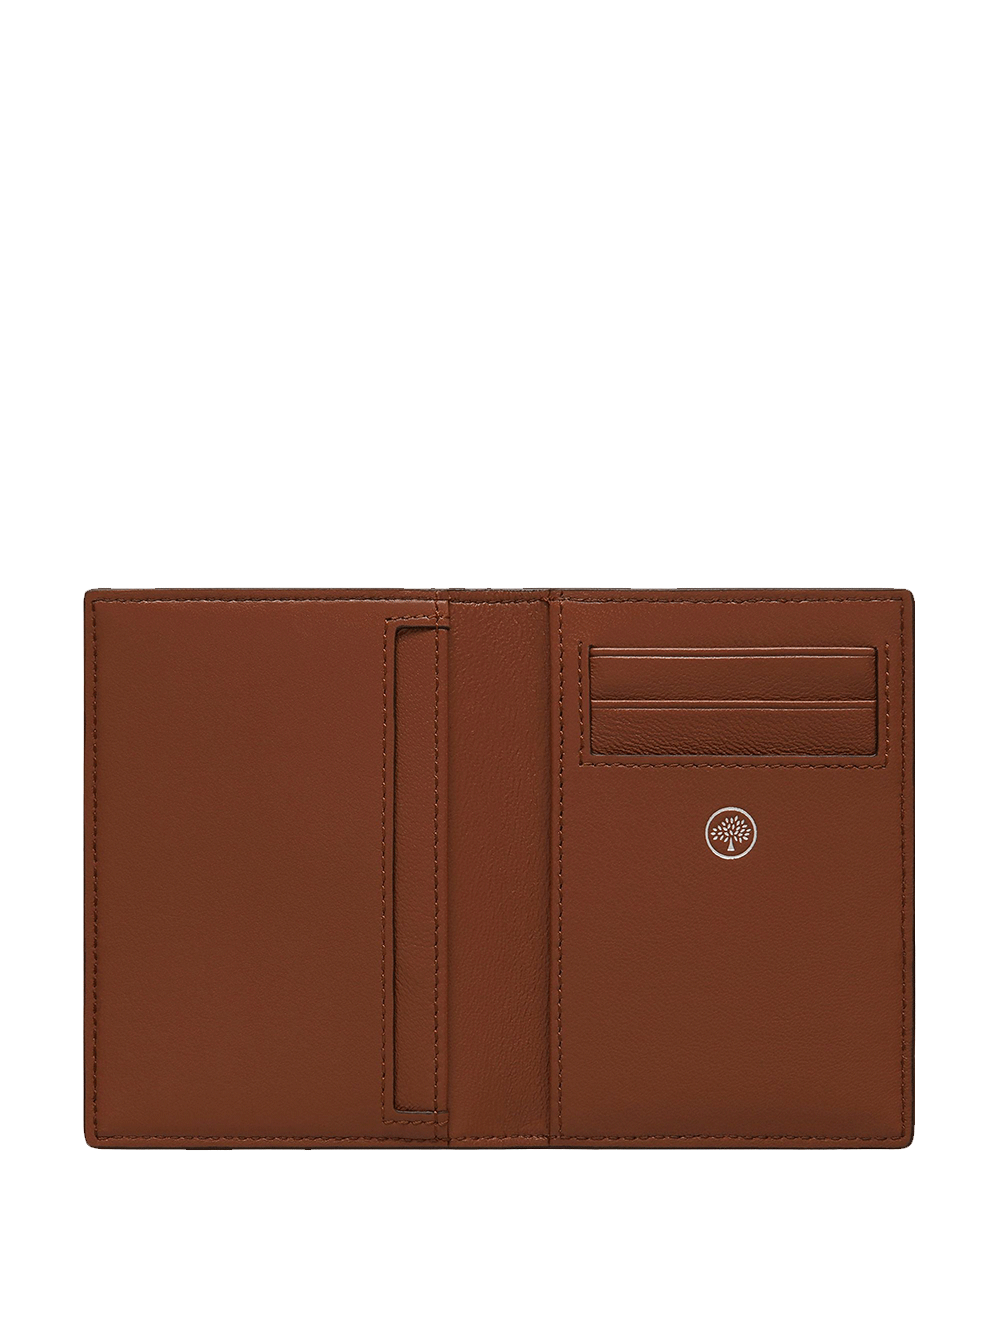 Mulberry Card Wallet Two Tone Scg Brown 2